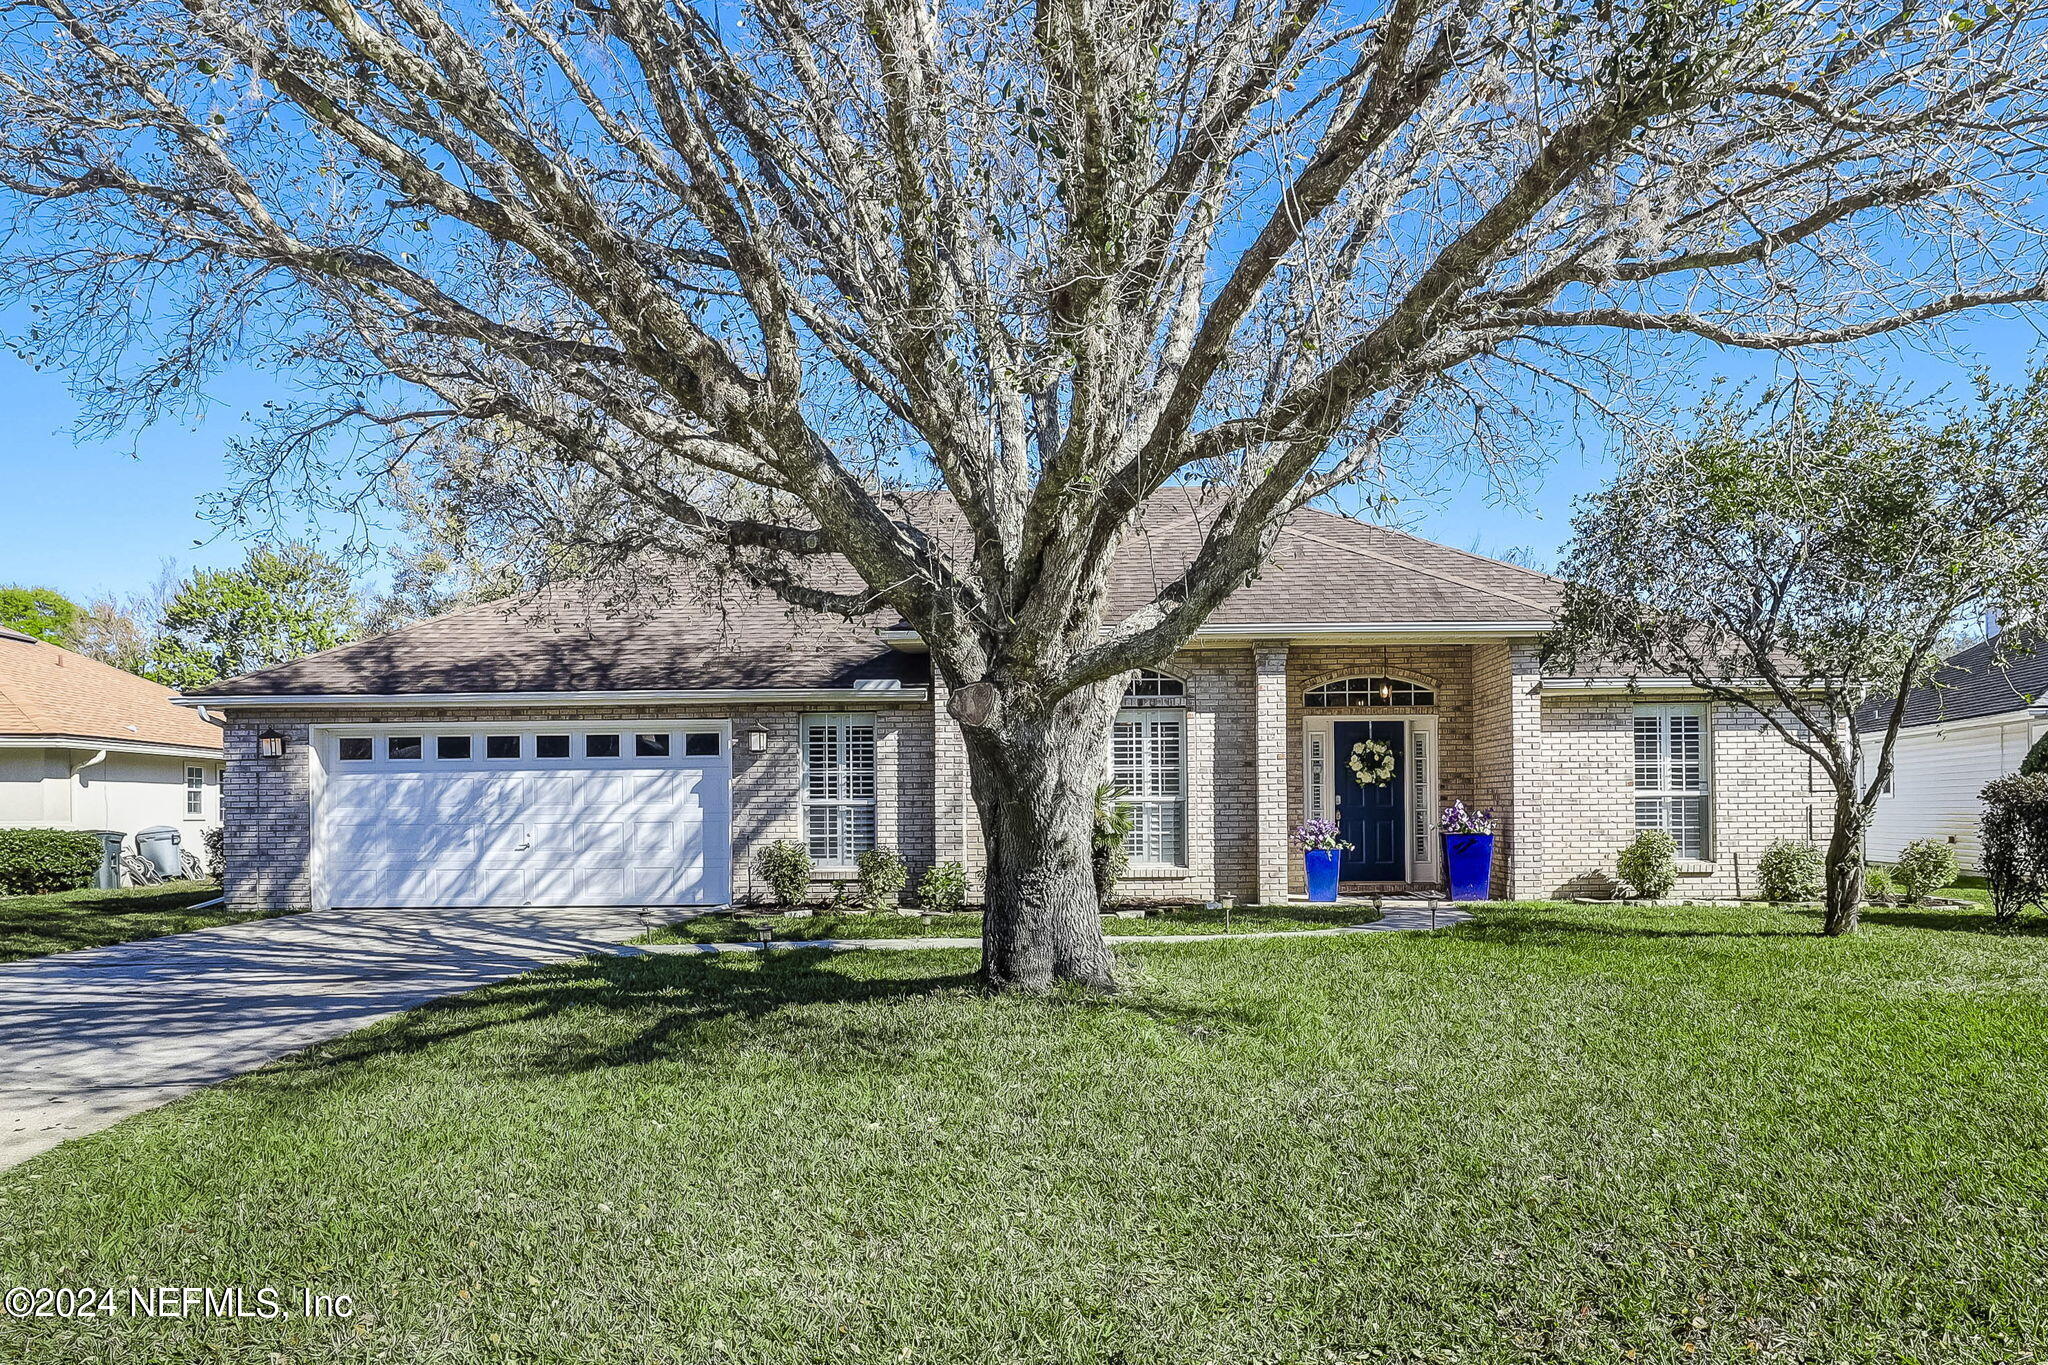 St Johns, FL home for sale located at 1065 DURBIN PARKE Drive, St Johns, FL 32259